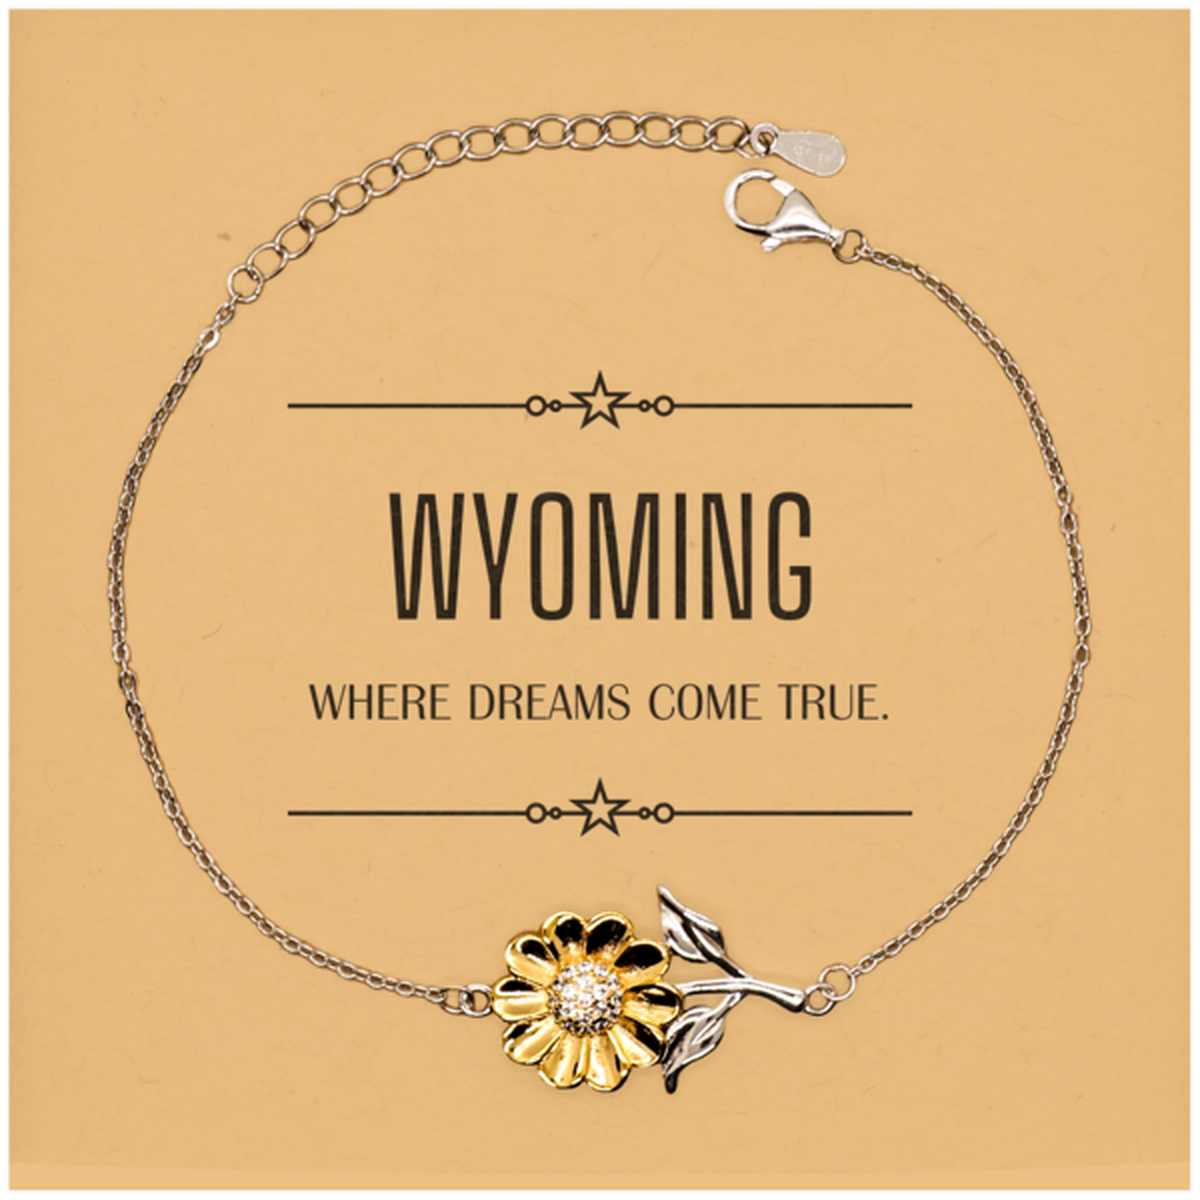 Love Wyoming State Sunflower Bracelet, Wyoming Where dreams come true, Birthday Christmas Inspirational Gifts For Wyoming Men, Women, Friends